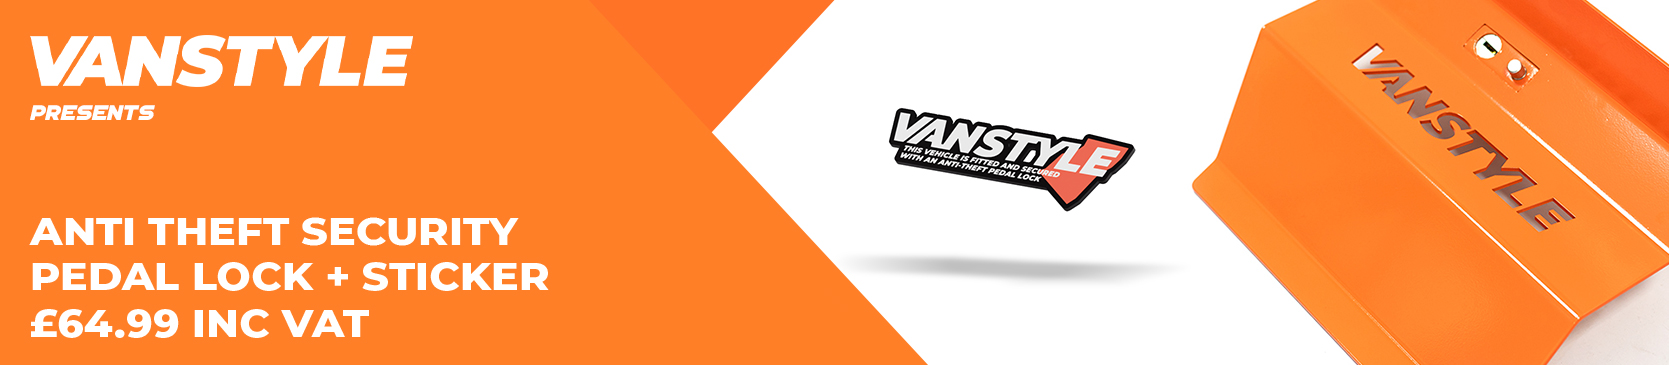 The all-new Vanstyle Pedal Lock is the last word in commercial vehicle security!